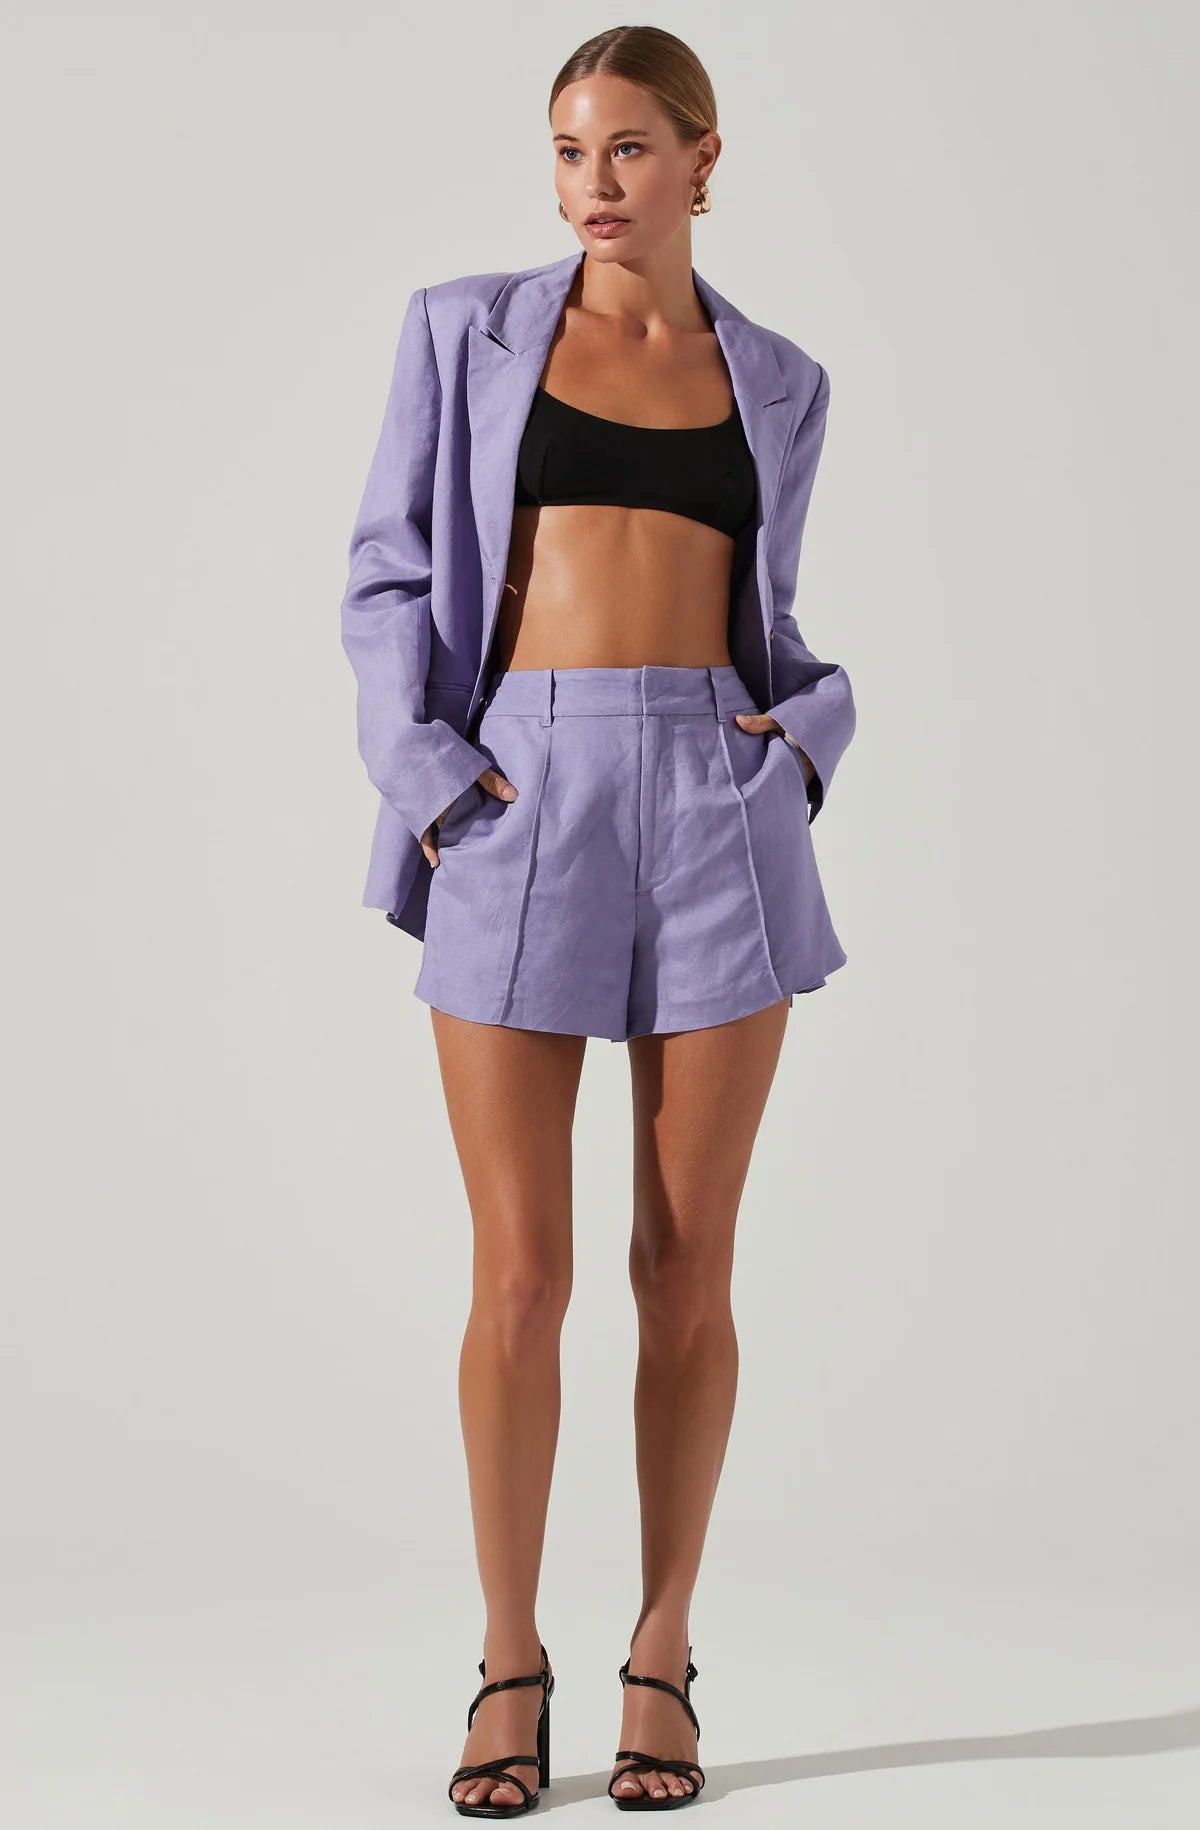 Model wearing Amiah High Waisted Shorts in purple from ASTR The Label available at UniKoncept in Waterloo